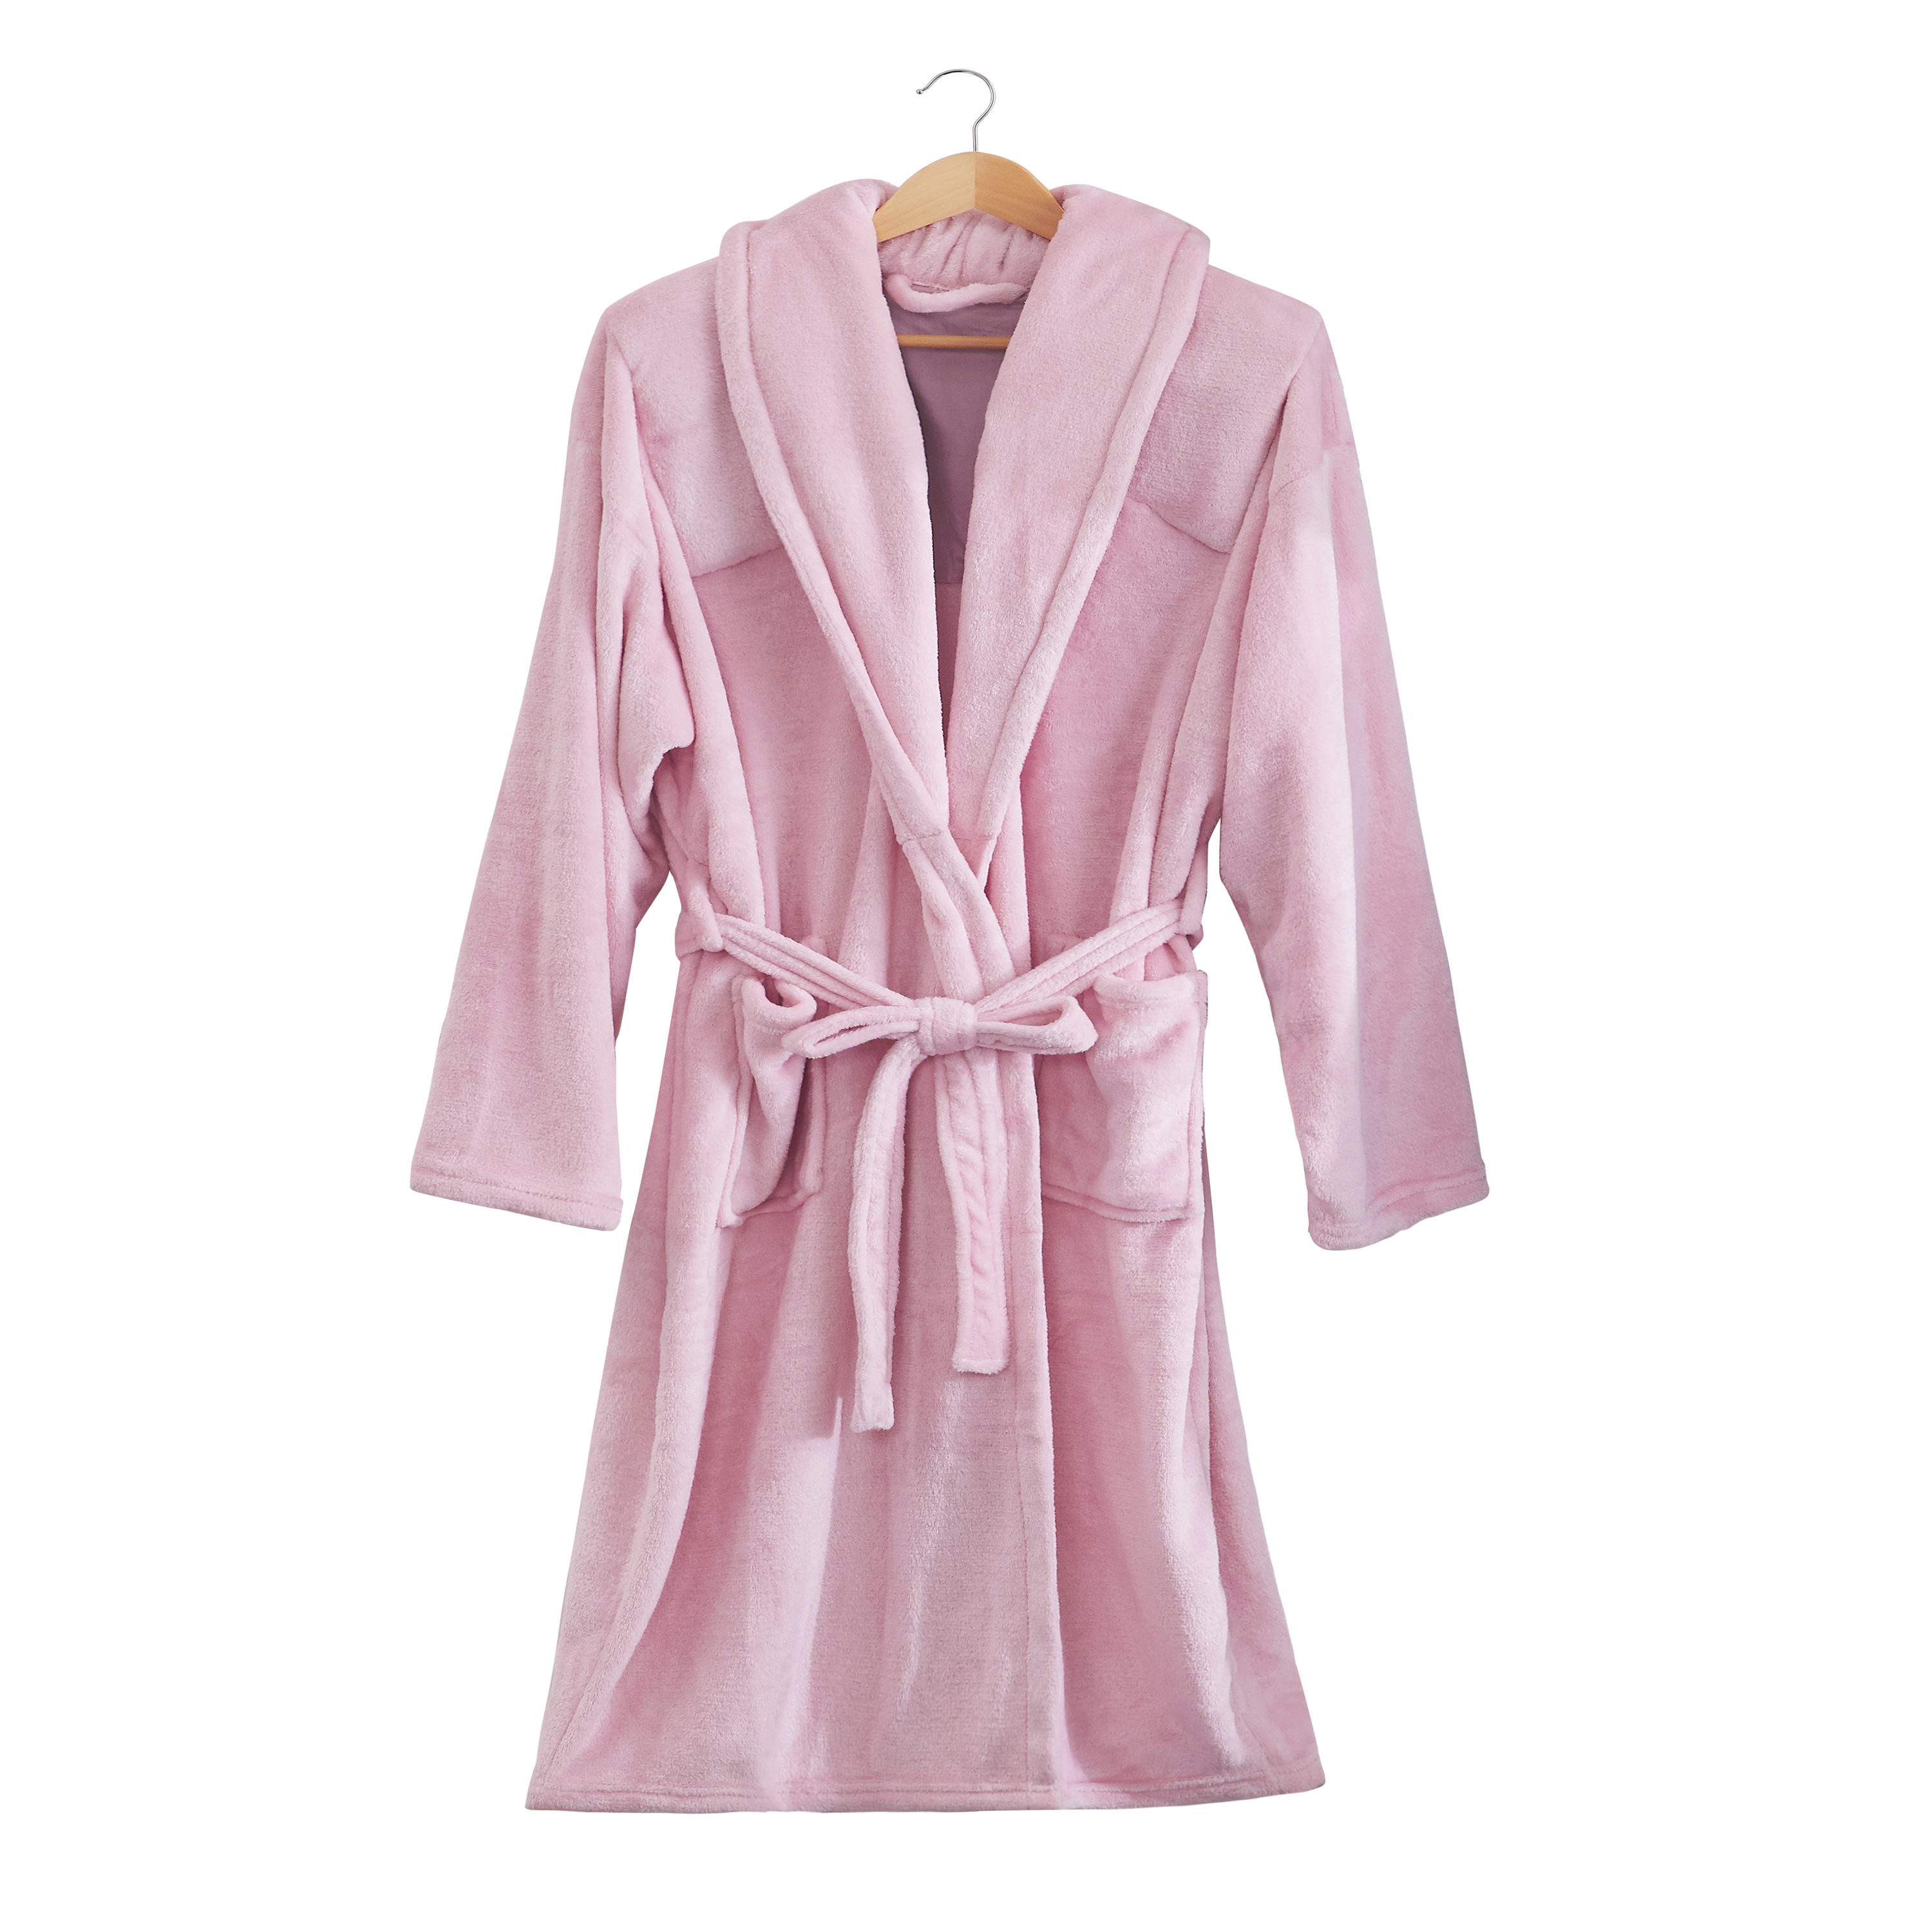 Sutton Home Medium Adult Unisex Pink Pocketed Solid Polyester Bathrobe ...